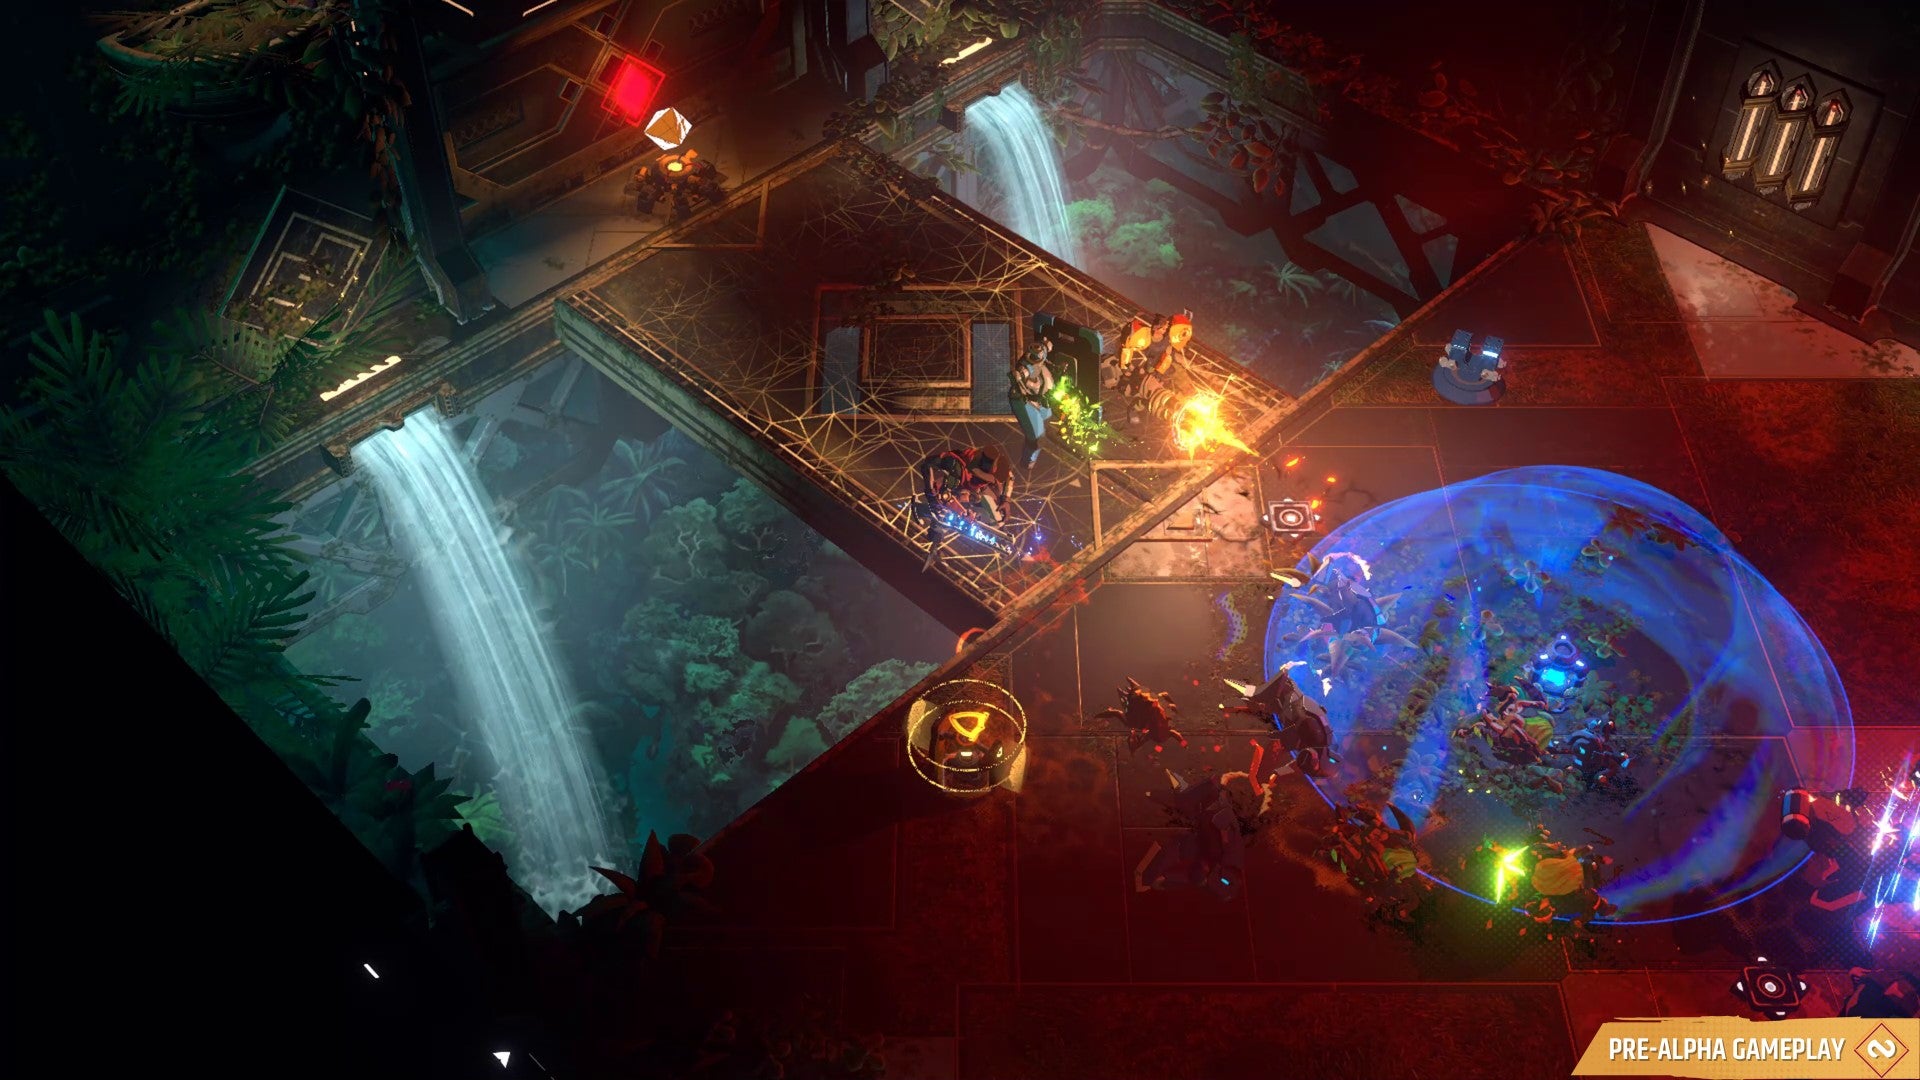 Three heroes fend off a swarm of aliens in Endless Dungeon.